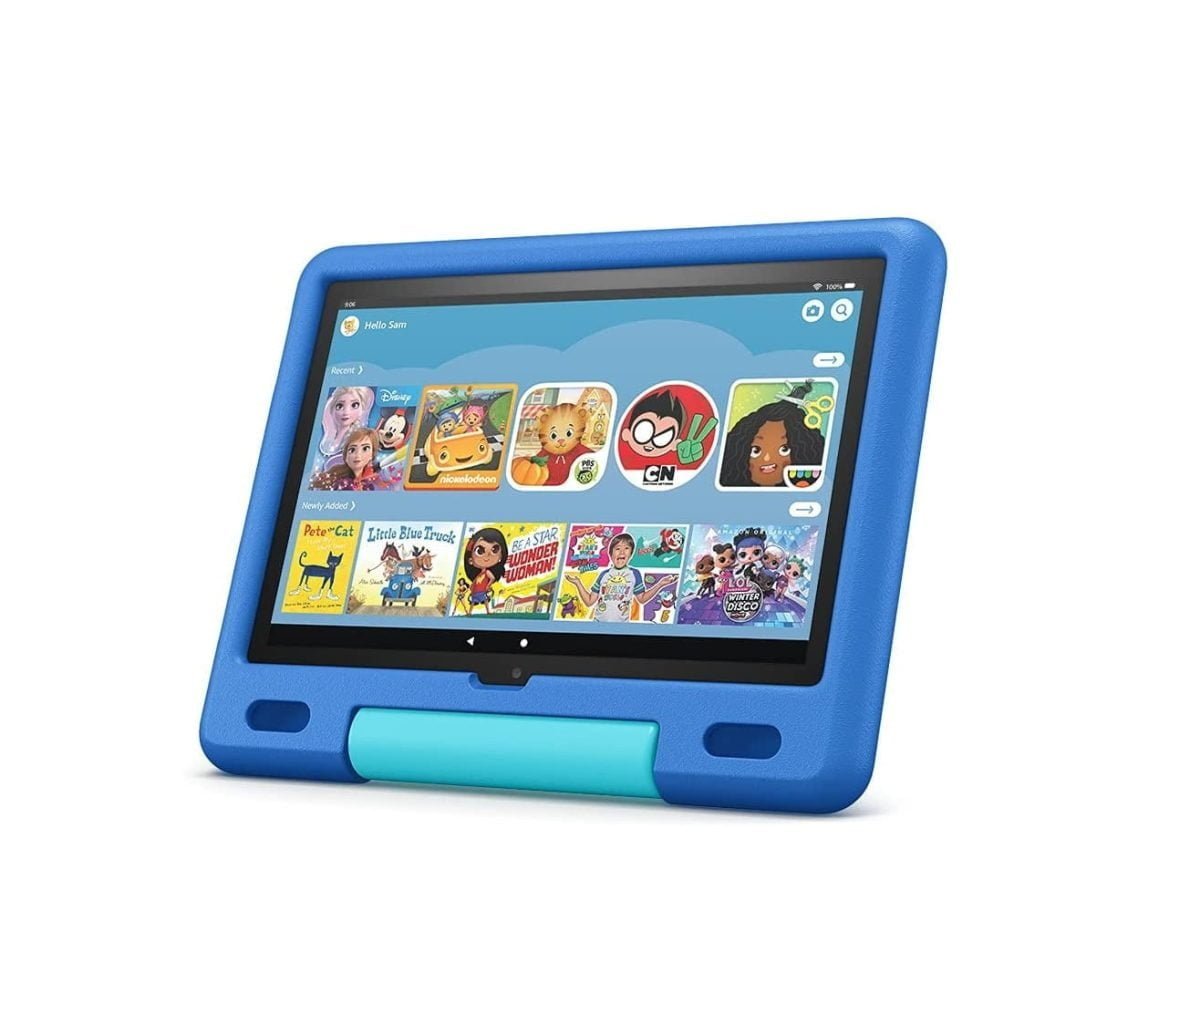 61Toosjor4S. Ac Sl1000 Amazon &Amp;Lt;H1&Amp;Gt;Amazon Fire Hd 10 Kids Tablet, 10.1&Amp;Quot; 11Th Generation, 1080P Full Hd, Ages 3–7, 32 Gb, Sky Blue&Amp;Lt;/H1&Amp;Gt; &Amp;Lt;Ul&Amp;Gt; &Amp;Lt;Li&Amp;Gt;&Amp;Lt;Span Class=&Amp;Quot;A-List-Item&Amp;Quot;&Amp;Gt;Easy-To-Use Parental Controls Allow You To Filter Content And Set Educational Goals And Time Limits. &Amp;Lt;/Span&Amp;Gt;&Amp;Lt;/Li&Amp;Gt; &Amp;Lt;Li&Amp;Gt;&Amp;Lt;Span Class=&Amp;Quot;A-List-Item&Amp;Quot;&Amp;Gt; Parents Can Give Kids Access To More Apps Like Netflix, Disney+, And Zoom Via The Amazon Parent Dashboard. &Amp;Lt;/Span&Amp;Gt;&Amp;Lt;/Li&Amp;Gt; &Amp;Lt;Li&Amp;Gt;&Amp;Lt;Span Class=&Amp;Quot;A-List-Item&Amp;Quot;&Amp;Gt; Features An Octa-Core Processor, 3 Gb Ram, 10.1&Amp;Quot; 1080P Full Hd Display, Dual Cameras, Usb-C (2.0) Port, And Up To 1 Tb Of Expandable Storage. The Screen Is Made With Strengthened Aluminosilicate Glass. &Amp;Lt;/Span&Amp;Gt;&Amp;Lt;/Li&Amp;Gt; &Amp;Lt;Li&Amp;Gt;&Amp;Lt;Span Class=&Amp;Quot;A-List-Item&Amp;Quot;&Amp;Gt; Features A Usb-C (2.0) Port And Includes A Usb-C Cable And 9W Power Adapter In The Box.&Amp;Lt;/Span&Amp;Gt;&Amp;Lt;/Li&Amp;Gt; &Amp;Lt;/Ul&Amp;Gt; &Amp;Nbsp; Amazon Amazon Fire Hd 10 Kids Tablet, 10.1&Amp;Quot; 11Th Generation, 1080P Full Hd, Ages 3–7, 32 Gb, Sky Blue